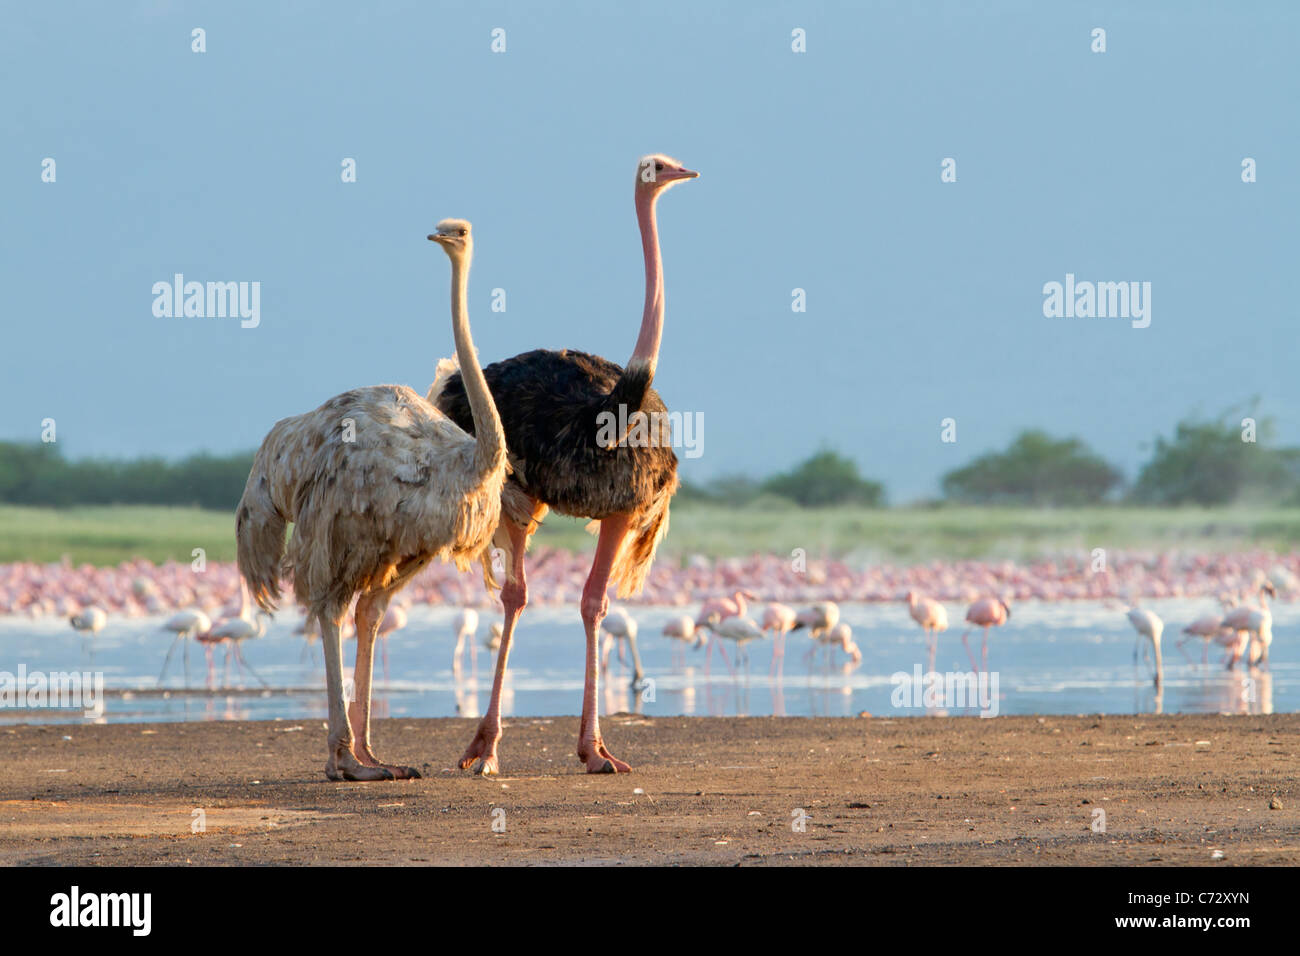 A pair of African ostriches (Struthio camelus) and flamingoes at lake Bogoria, Kenya. Stock Photo